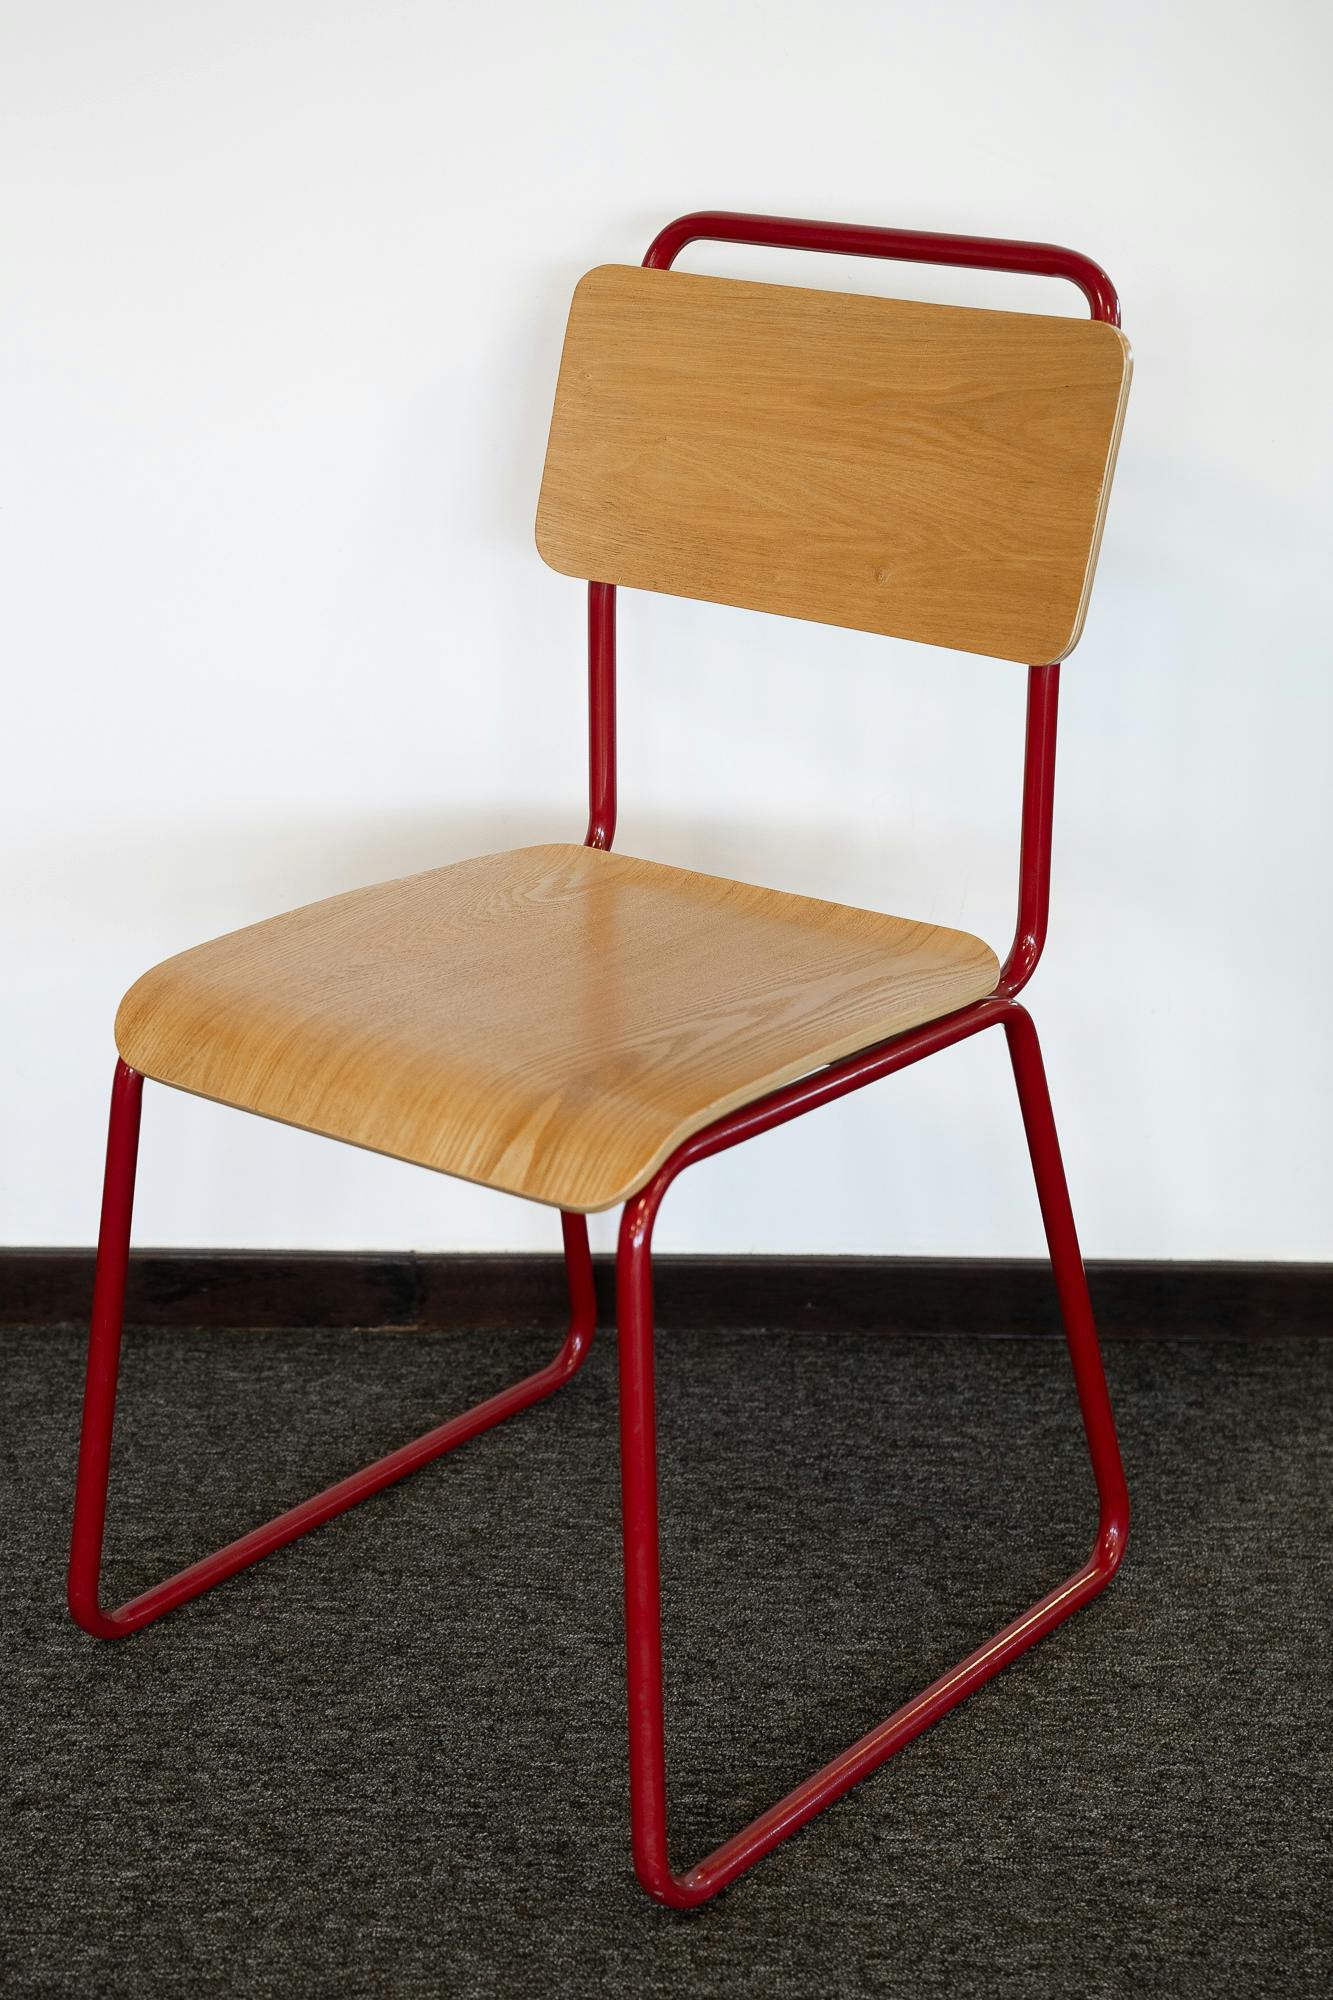 Cafeteria chair - Second hand quality "Chairs" - Relieve Furniture - 2